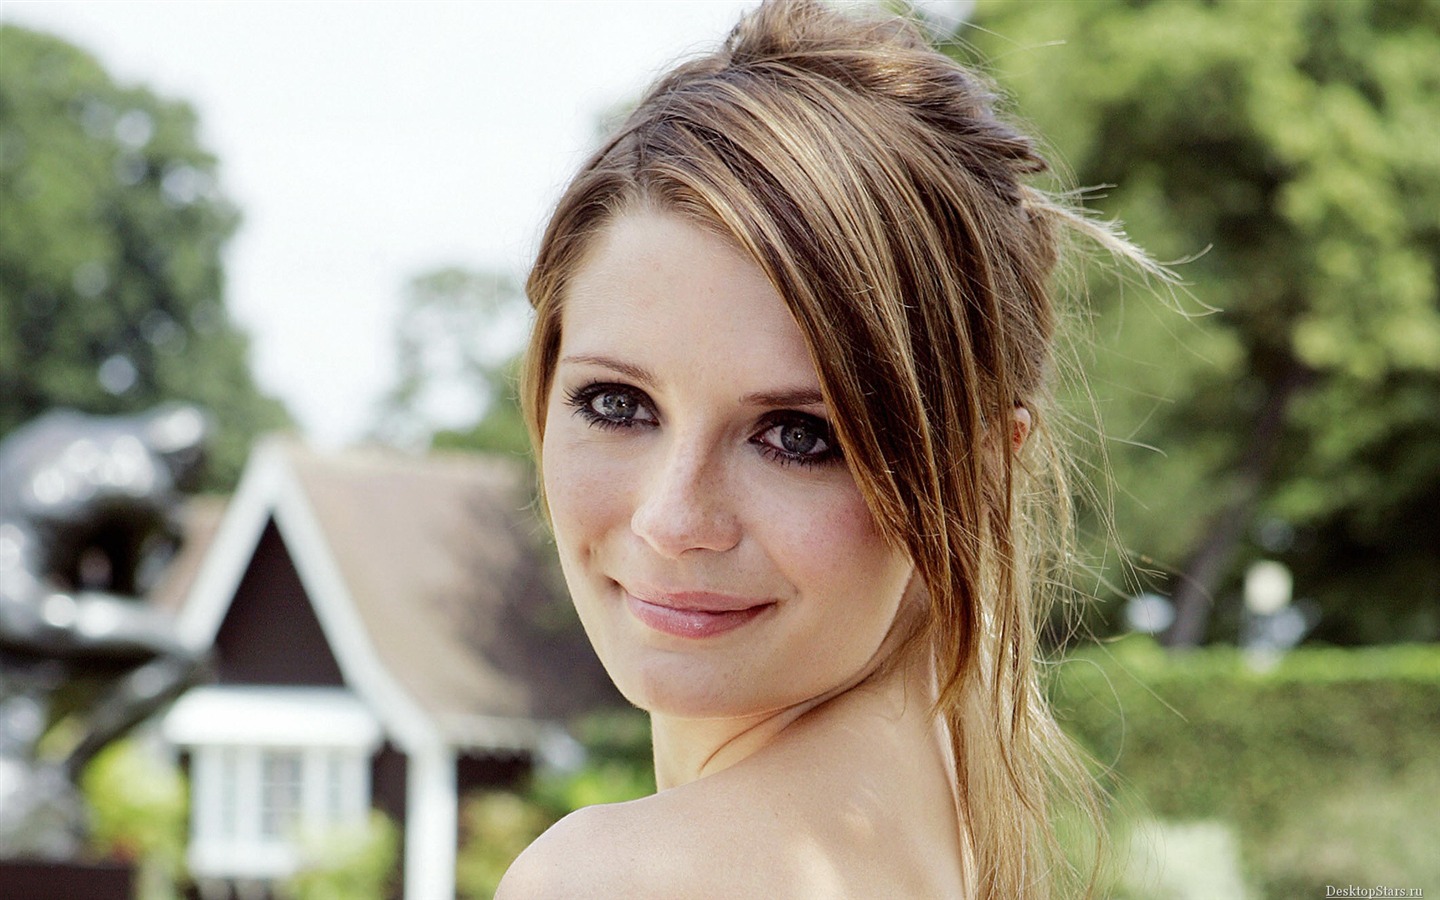 Mischa Barton #021 - 1440x900 Wallpapers Pictures Photos Images